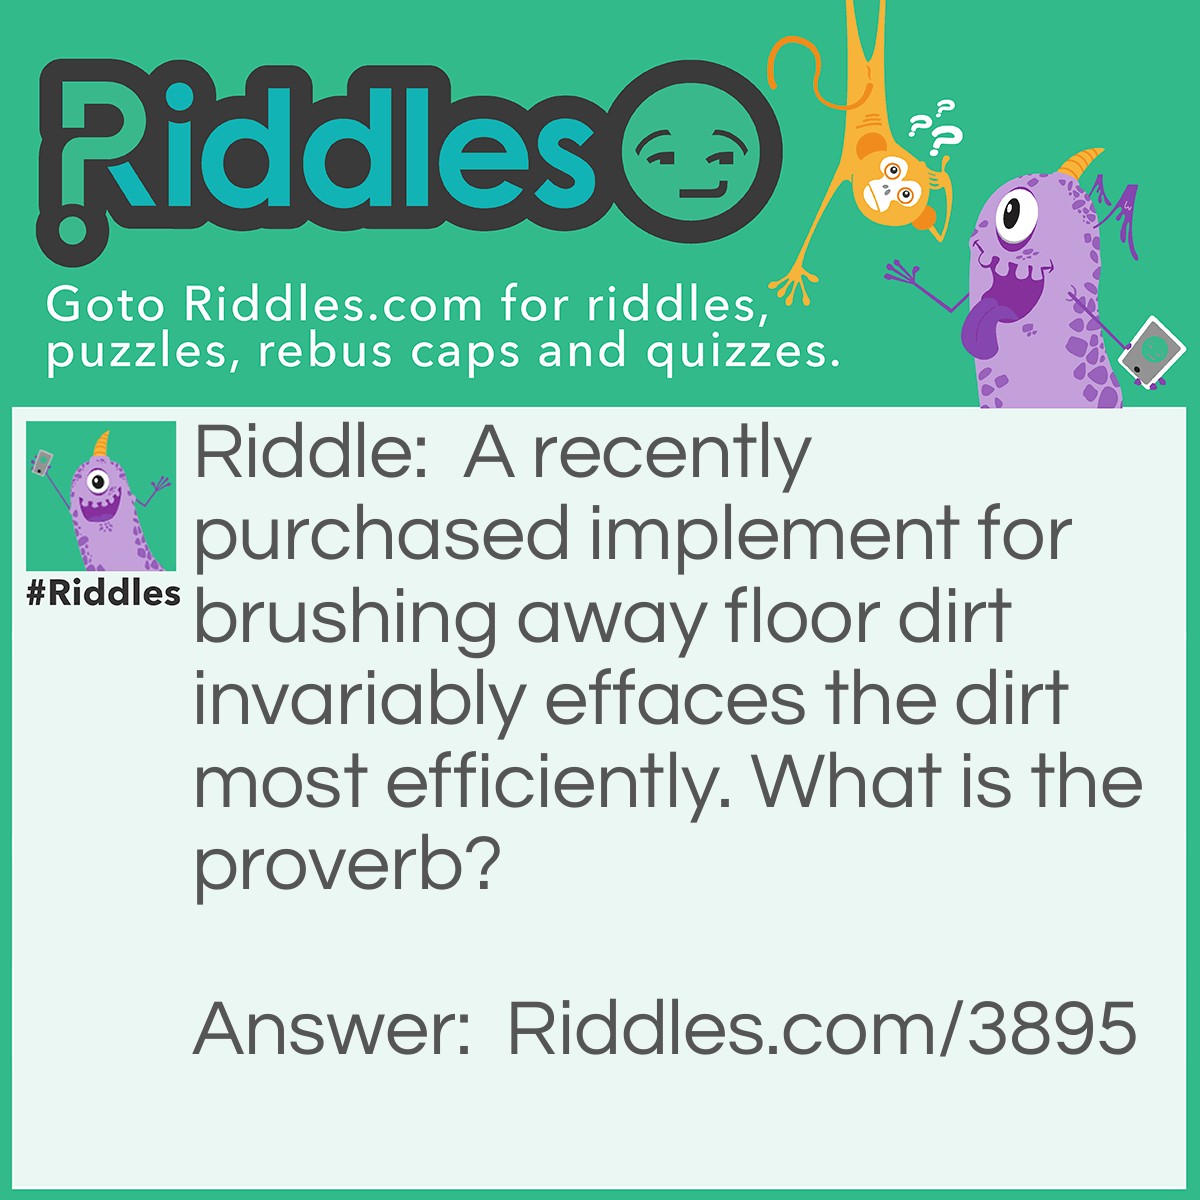 Riddle: A recently purchased implement for brushing away floor dirt invariably effaces the dirt most efficiently. What is the proverb? Answer: A new broom sweeps clean.